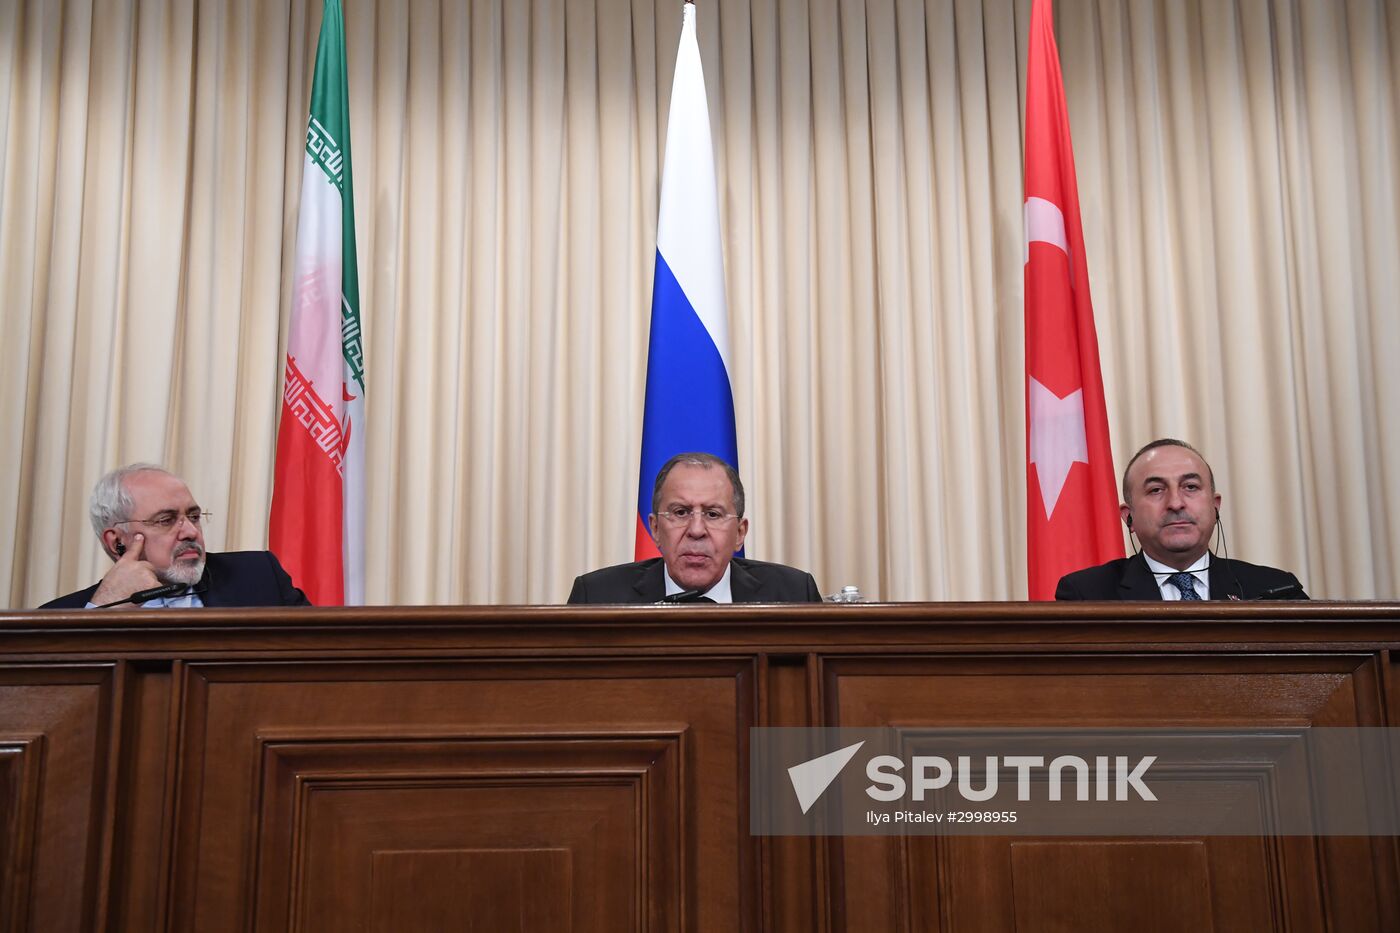 News conference by foreign ministers of Russia, Iran and Turkey